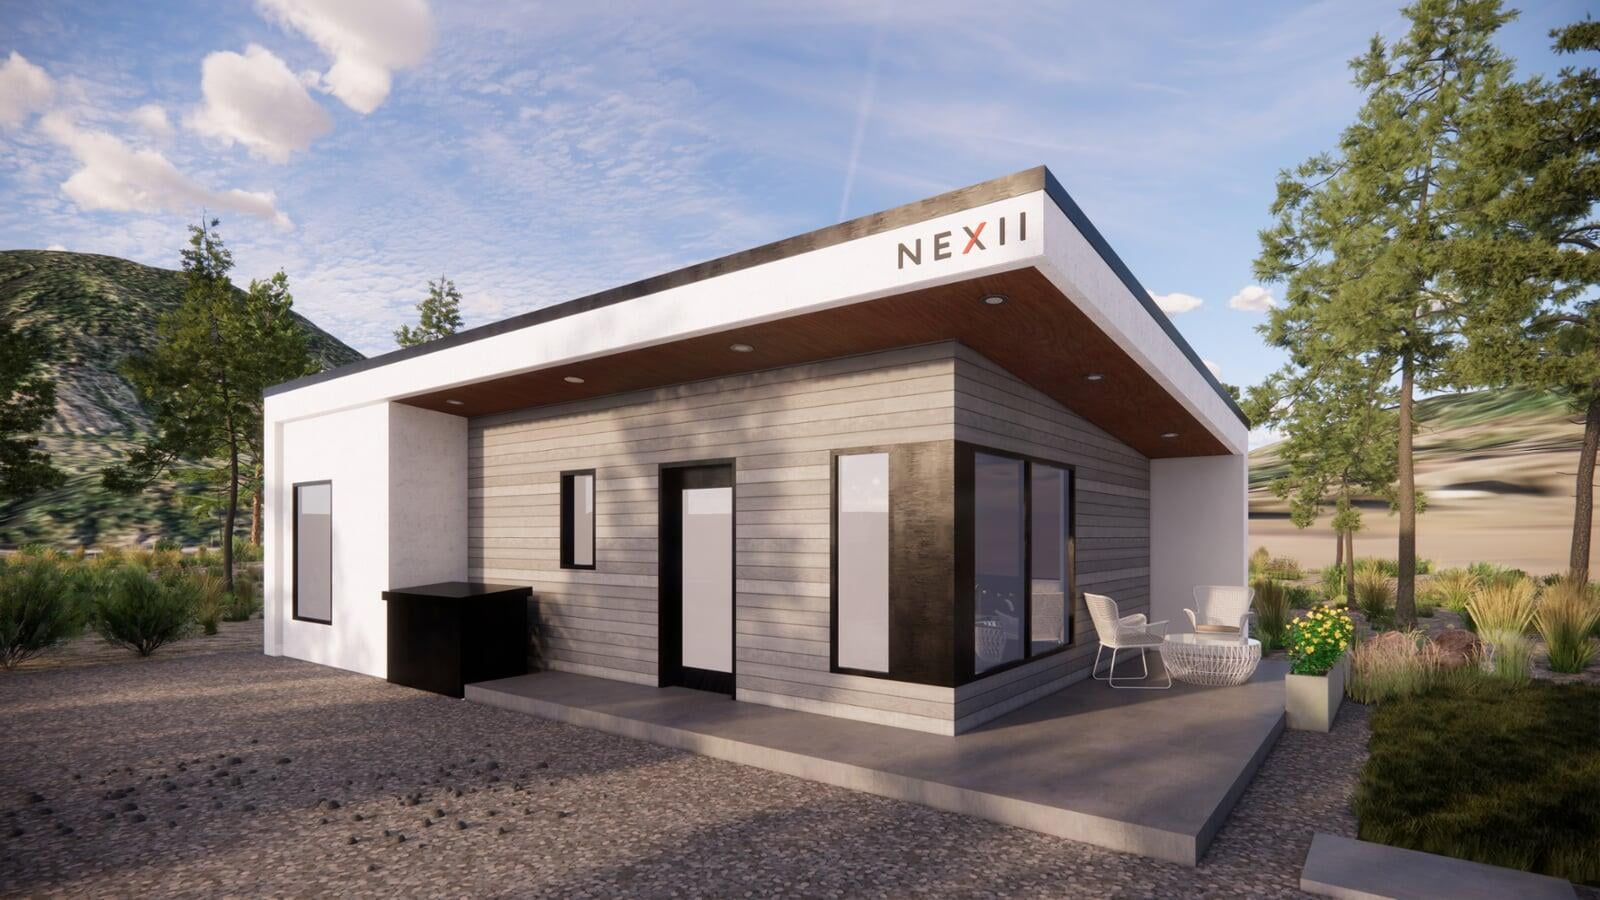 Nexii fire-resilient homes headed for Lytton rebuild